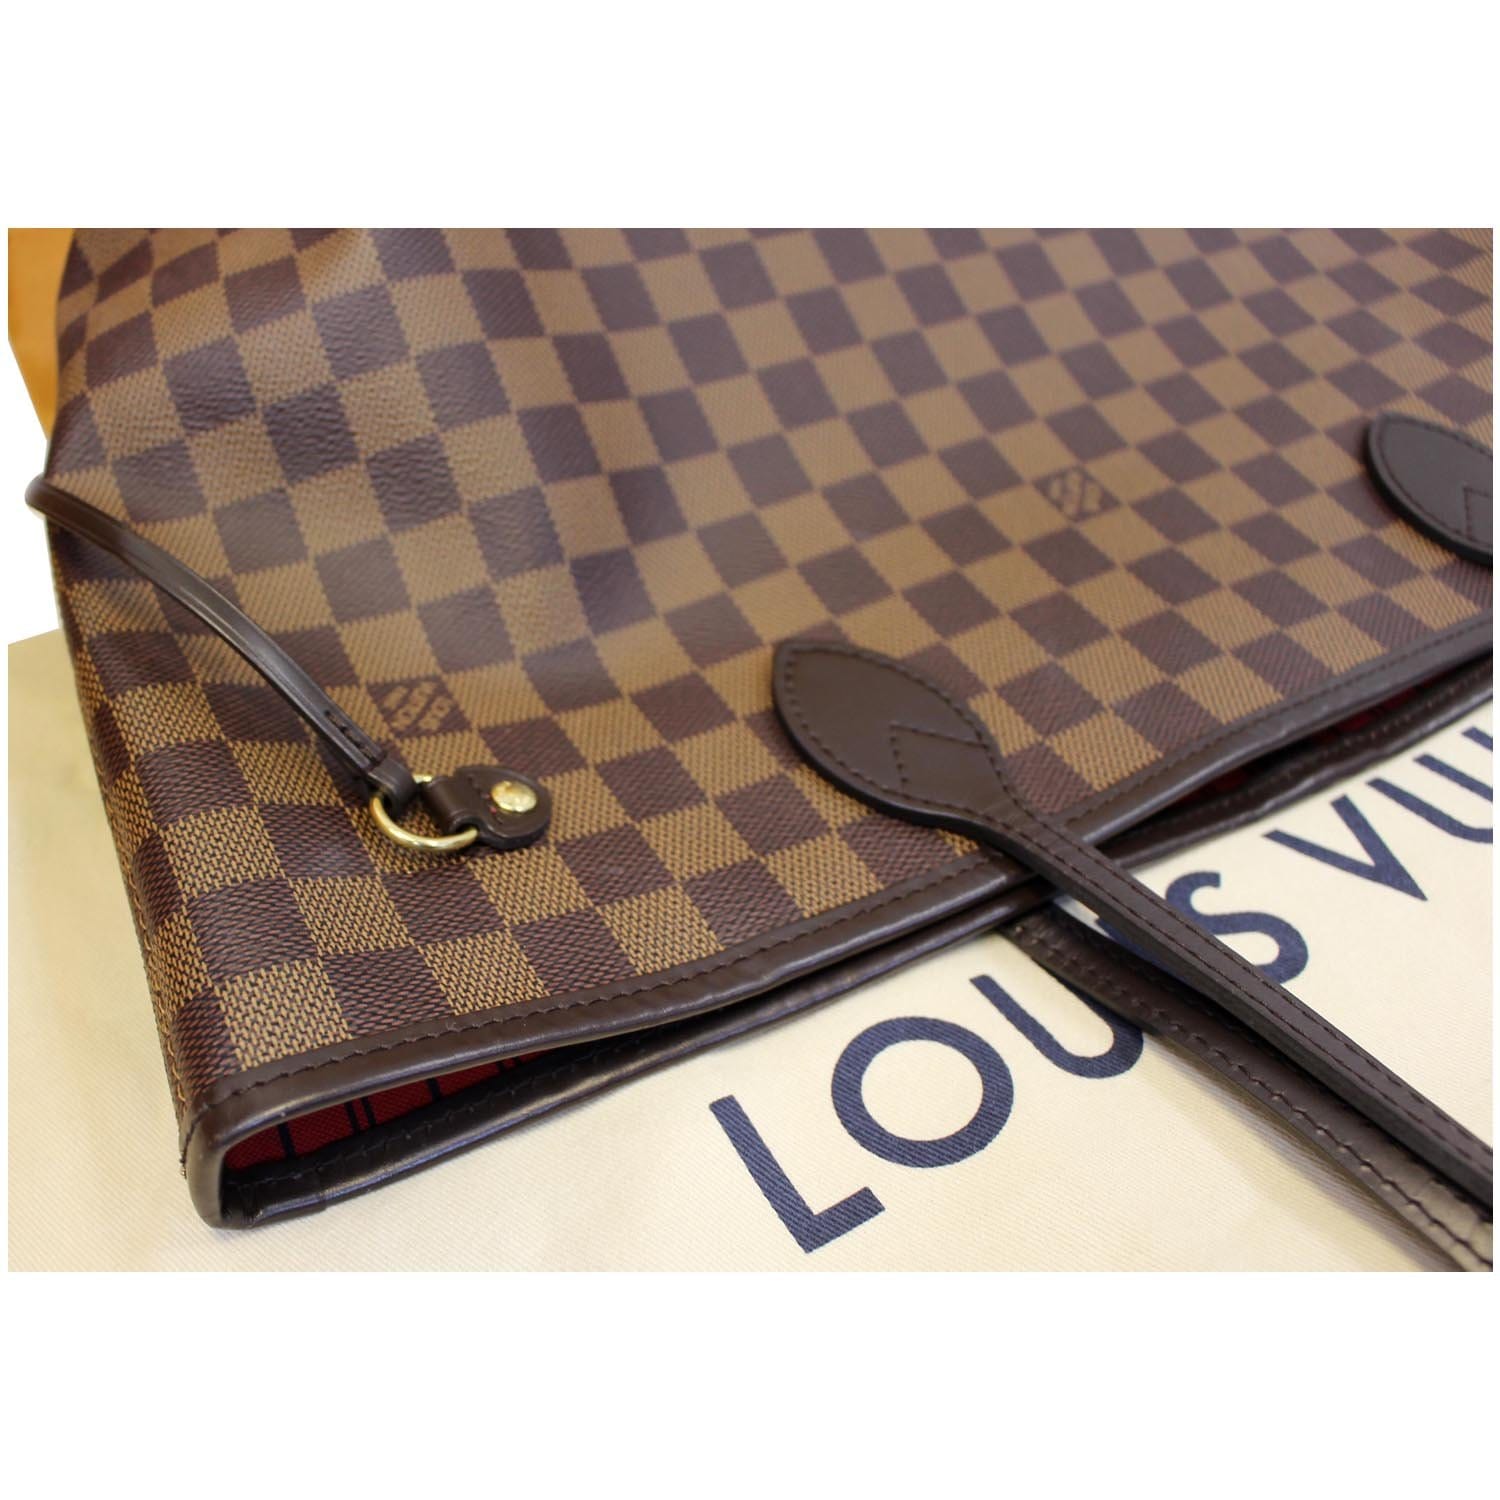 Louis Vuitton // Brown Damier Ebene Neverfull MM Tote Bag – VSP Consignment